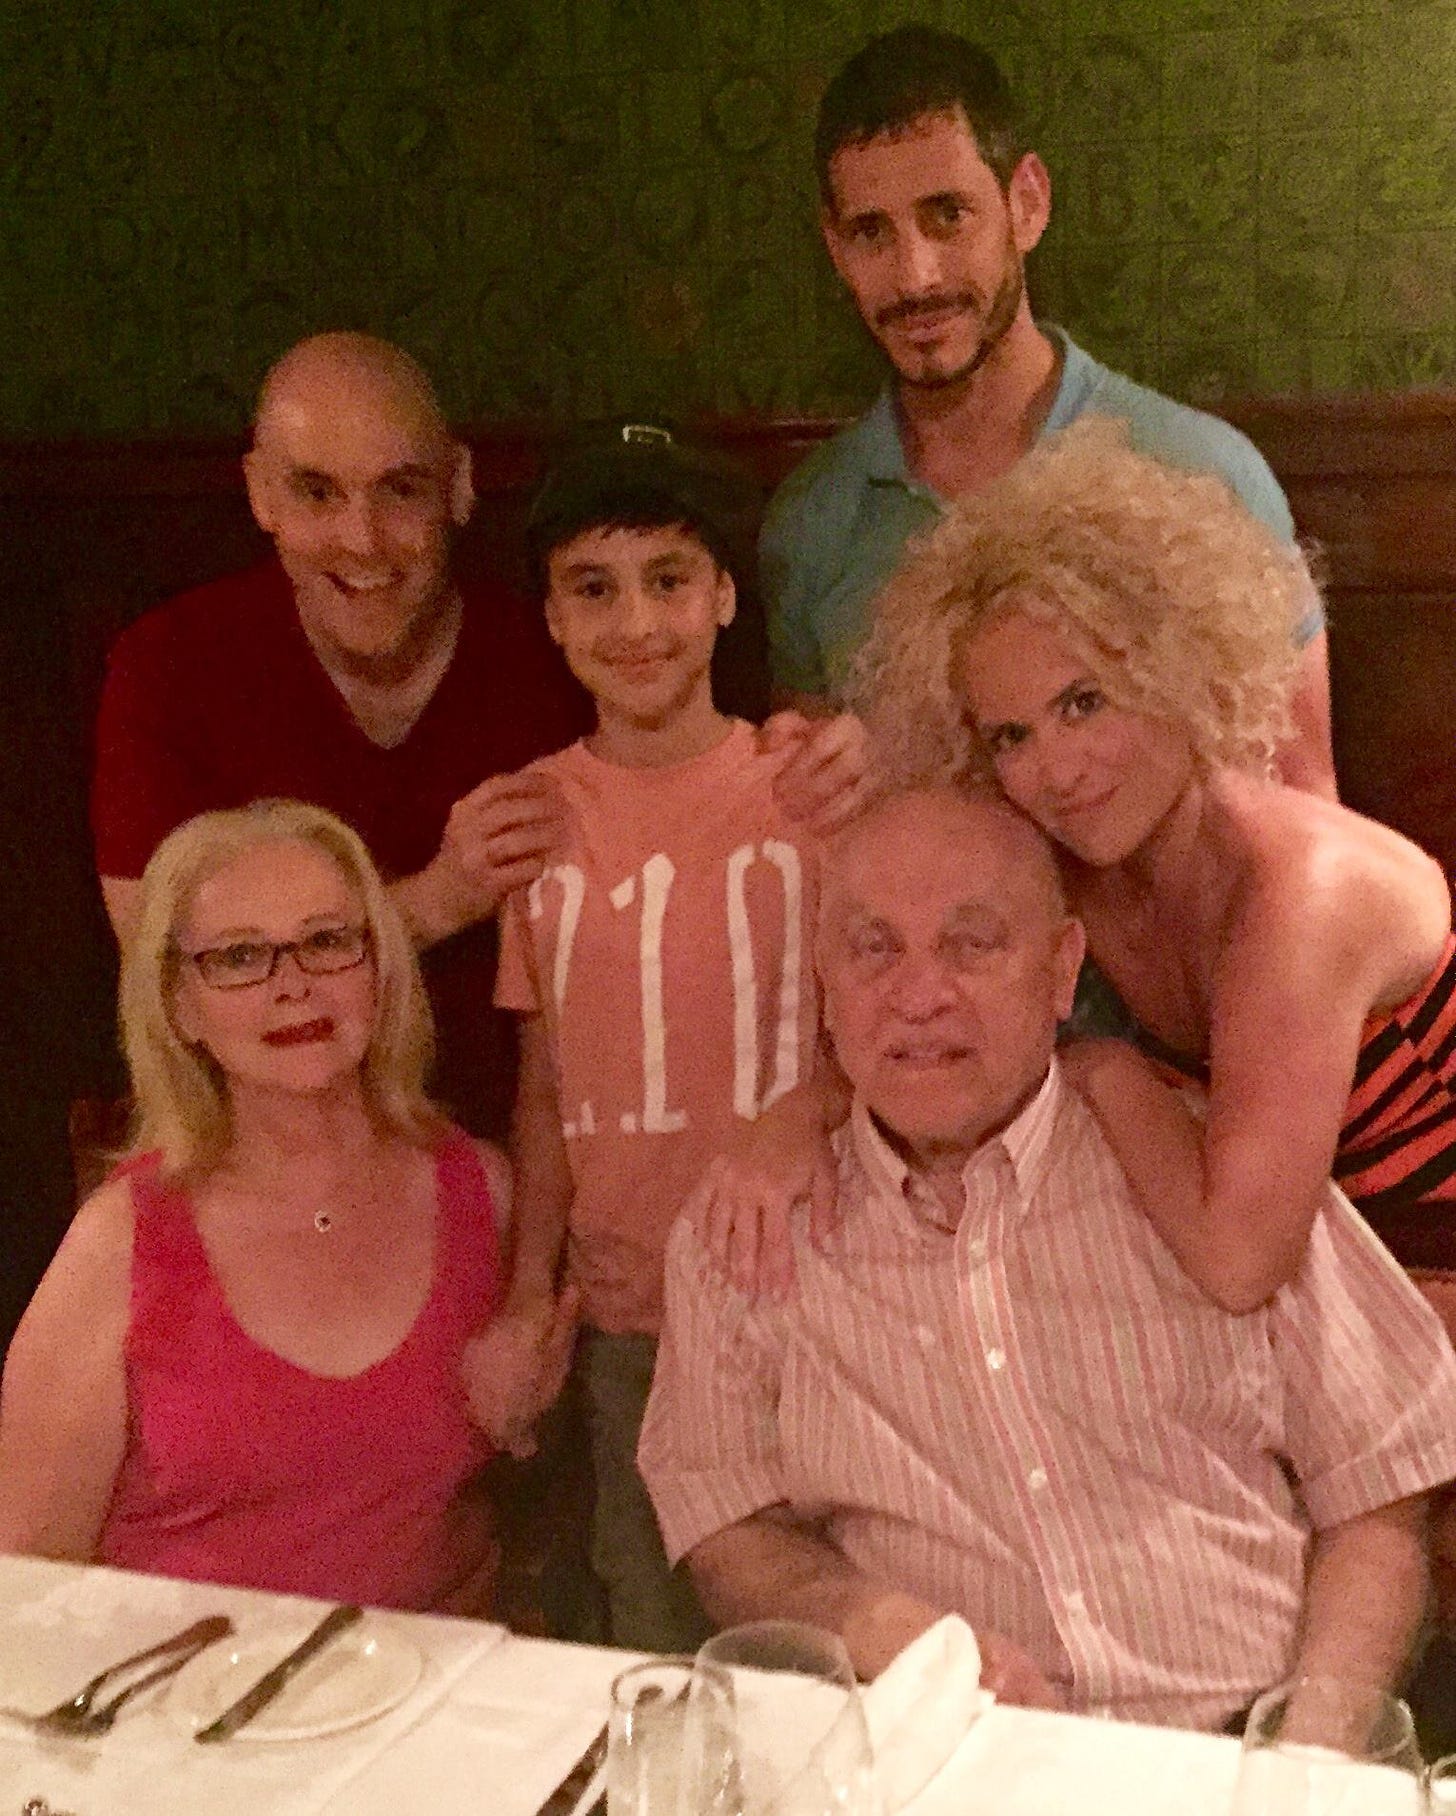 A picture of Dahlia's family. And she explains: Our last family photo - and first family photo - is from 2015. That’s my nephew in the middle. Five of the six people in this photo are vegan or vegetarian. This is the night we went to the steak house. No food for me, thank you. I was a Cosmopolitarian that night.